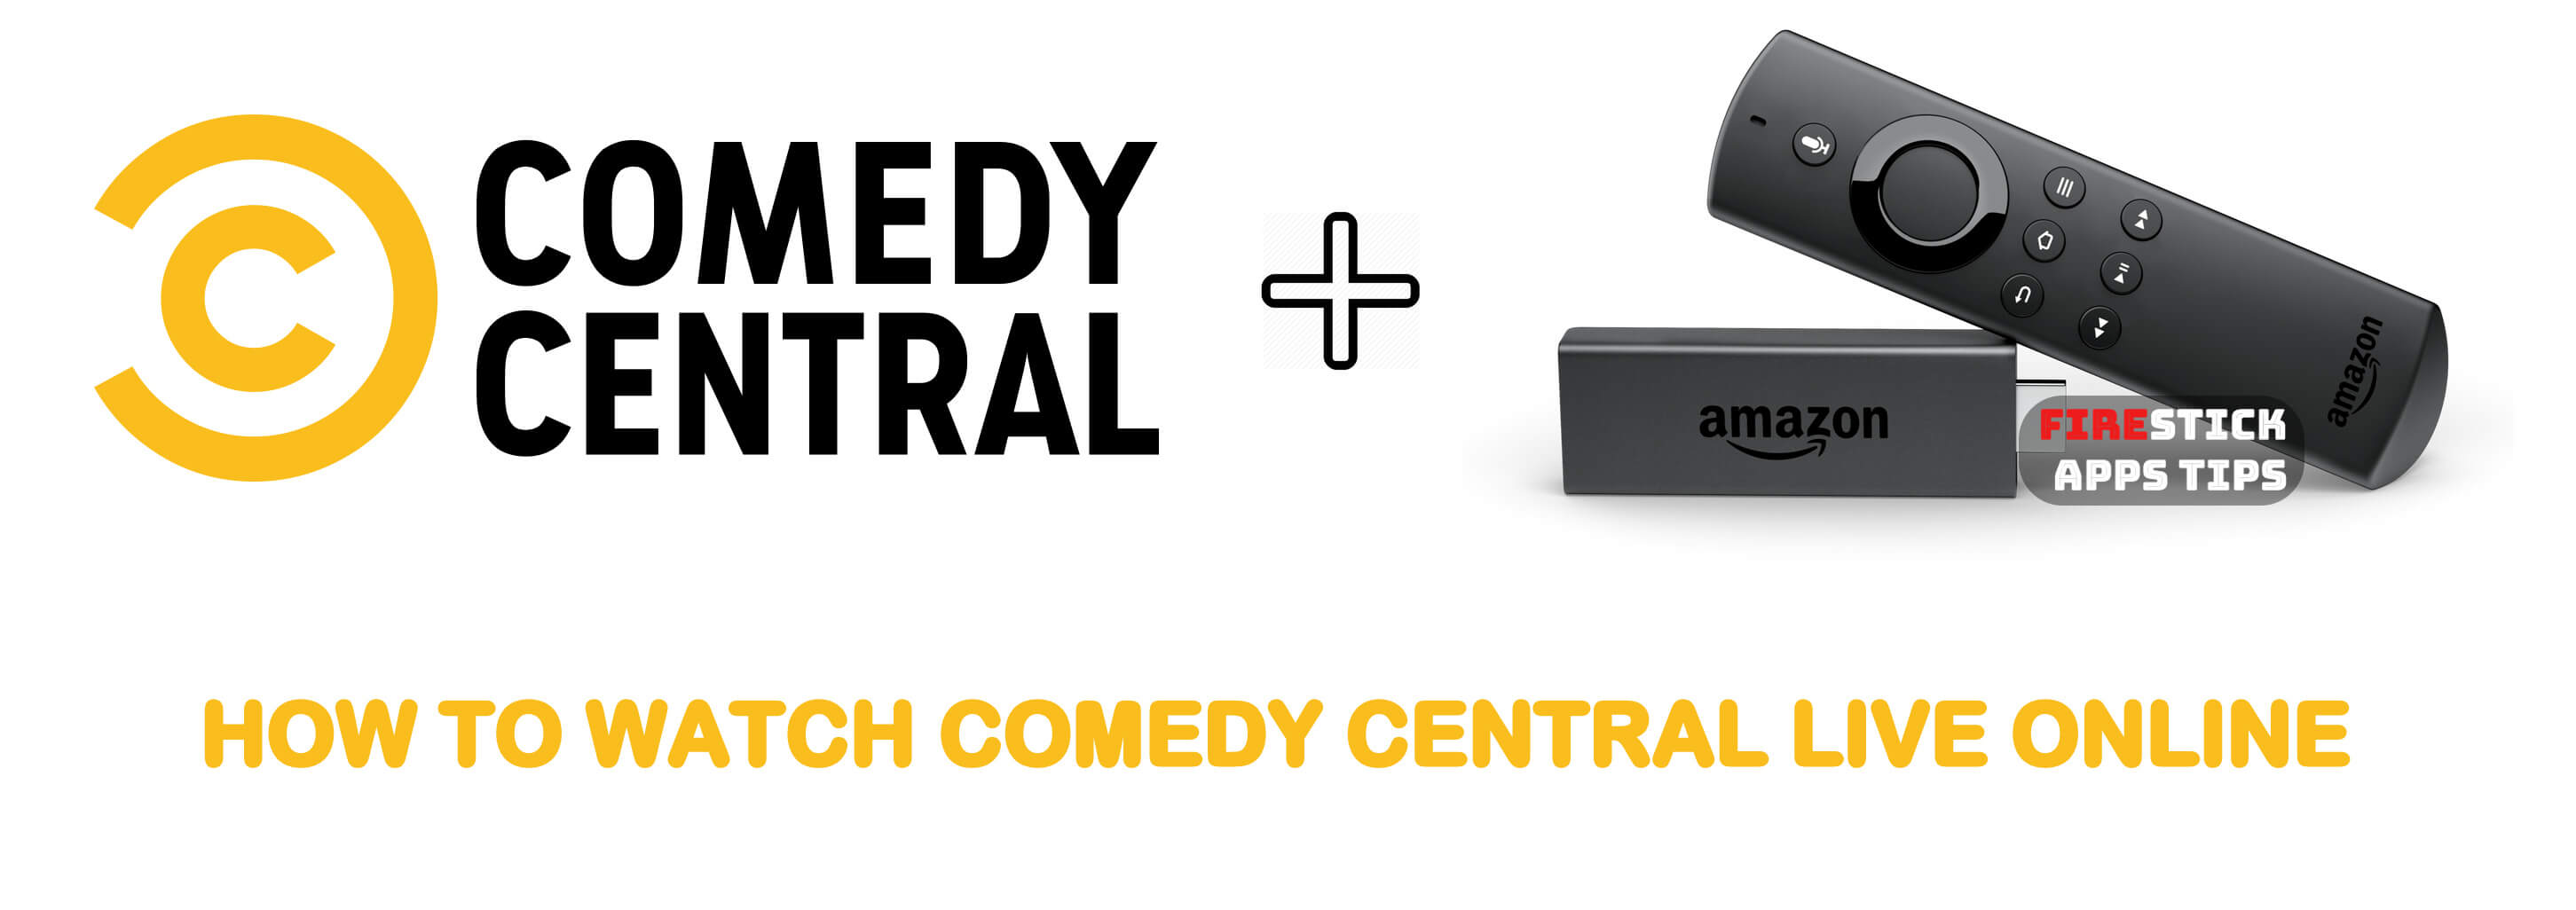 How to Watch Comedy Central Live Online on Firestick & Other Streaming Devices